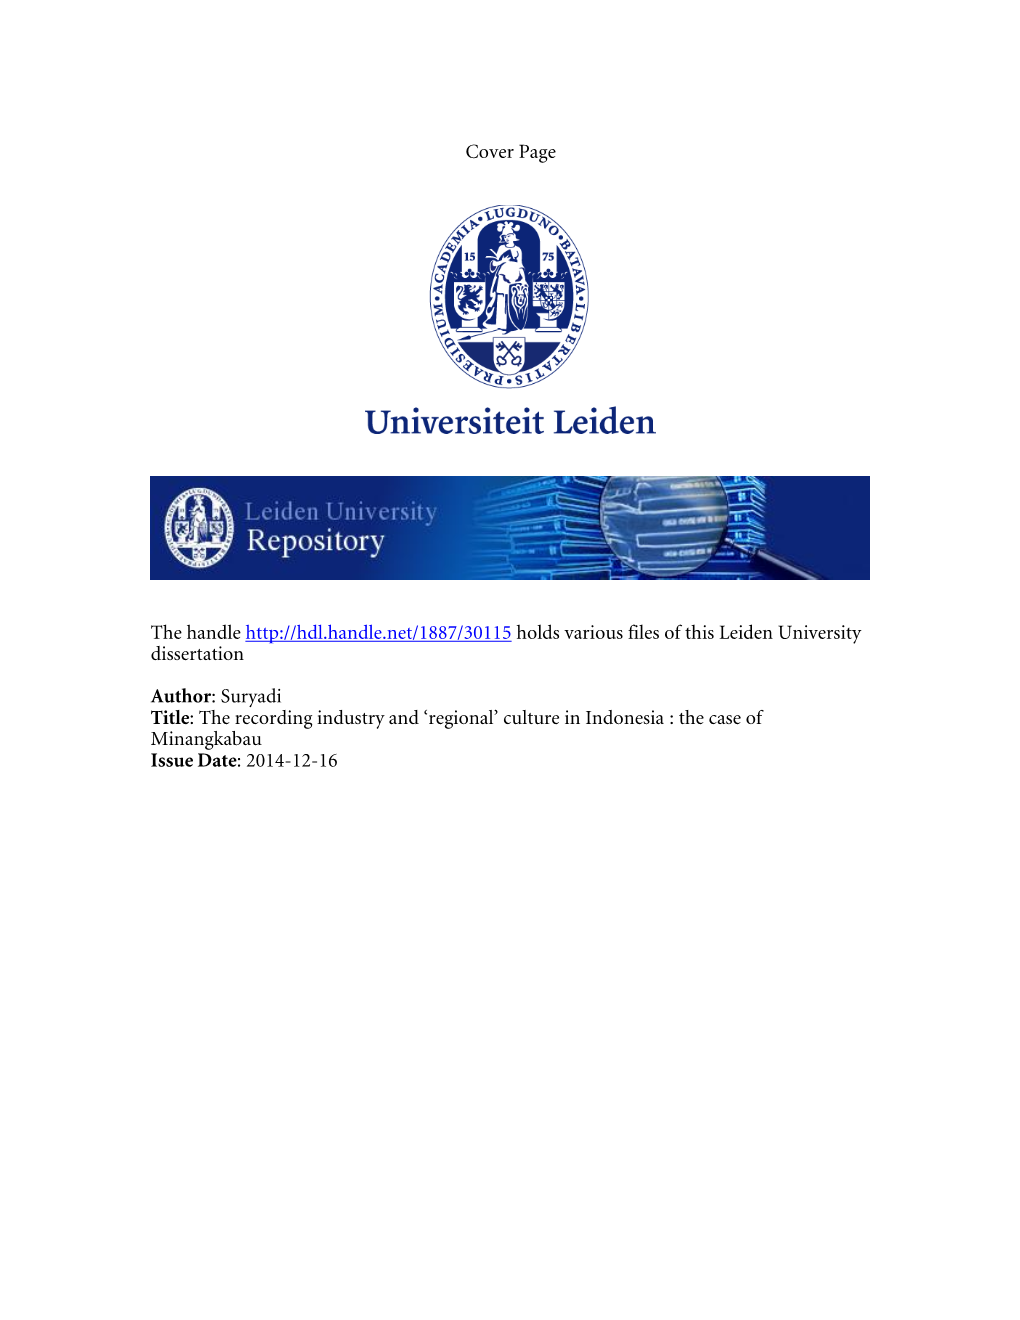 Cover Page the Handle Holds Various Files of This Leiden University Dissertation Author: Suryad